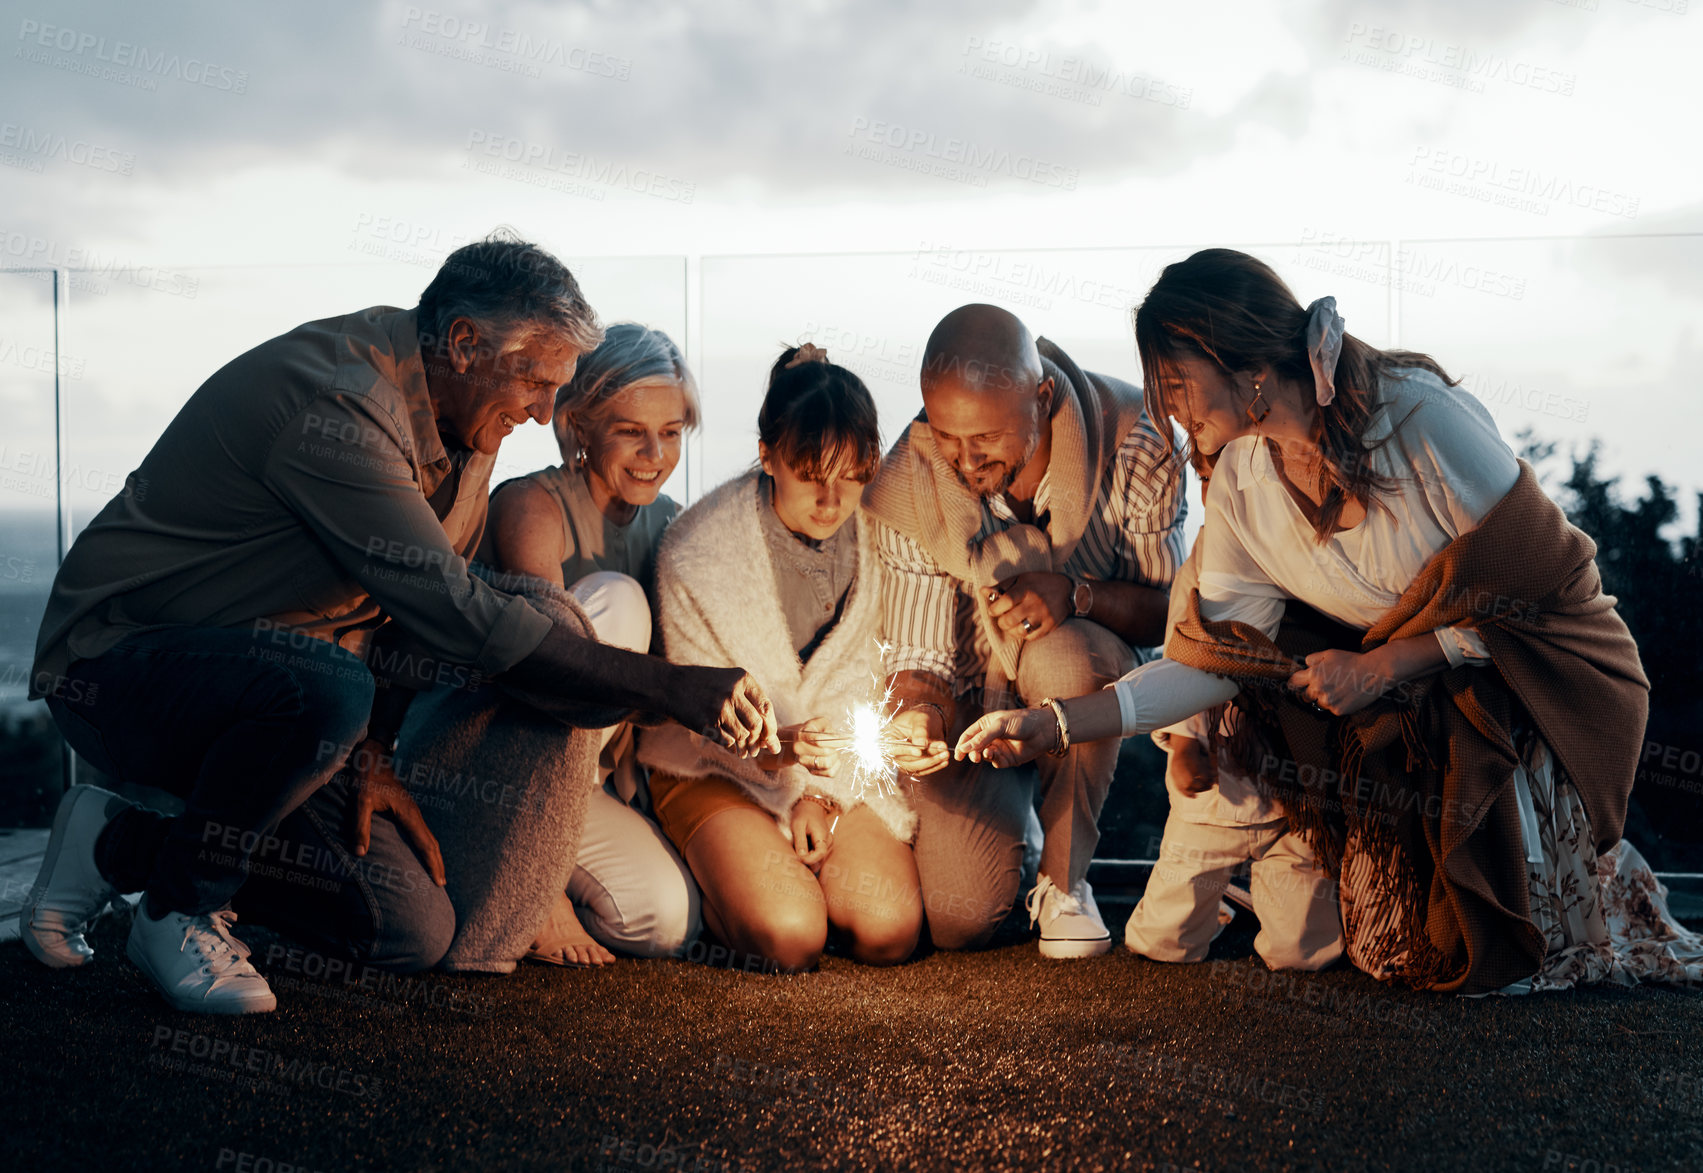 Buy stock photo Full length shot of an affectionate family lighting up sparklers while celebrating a new year outdoors